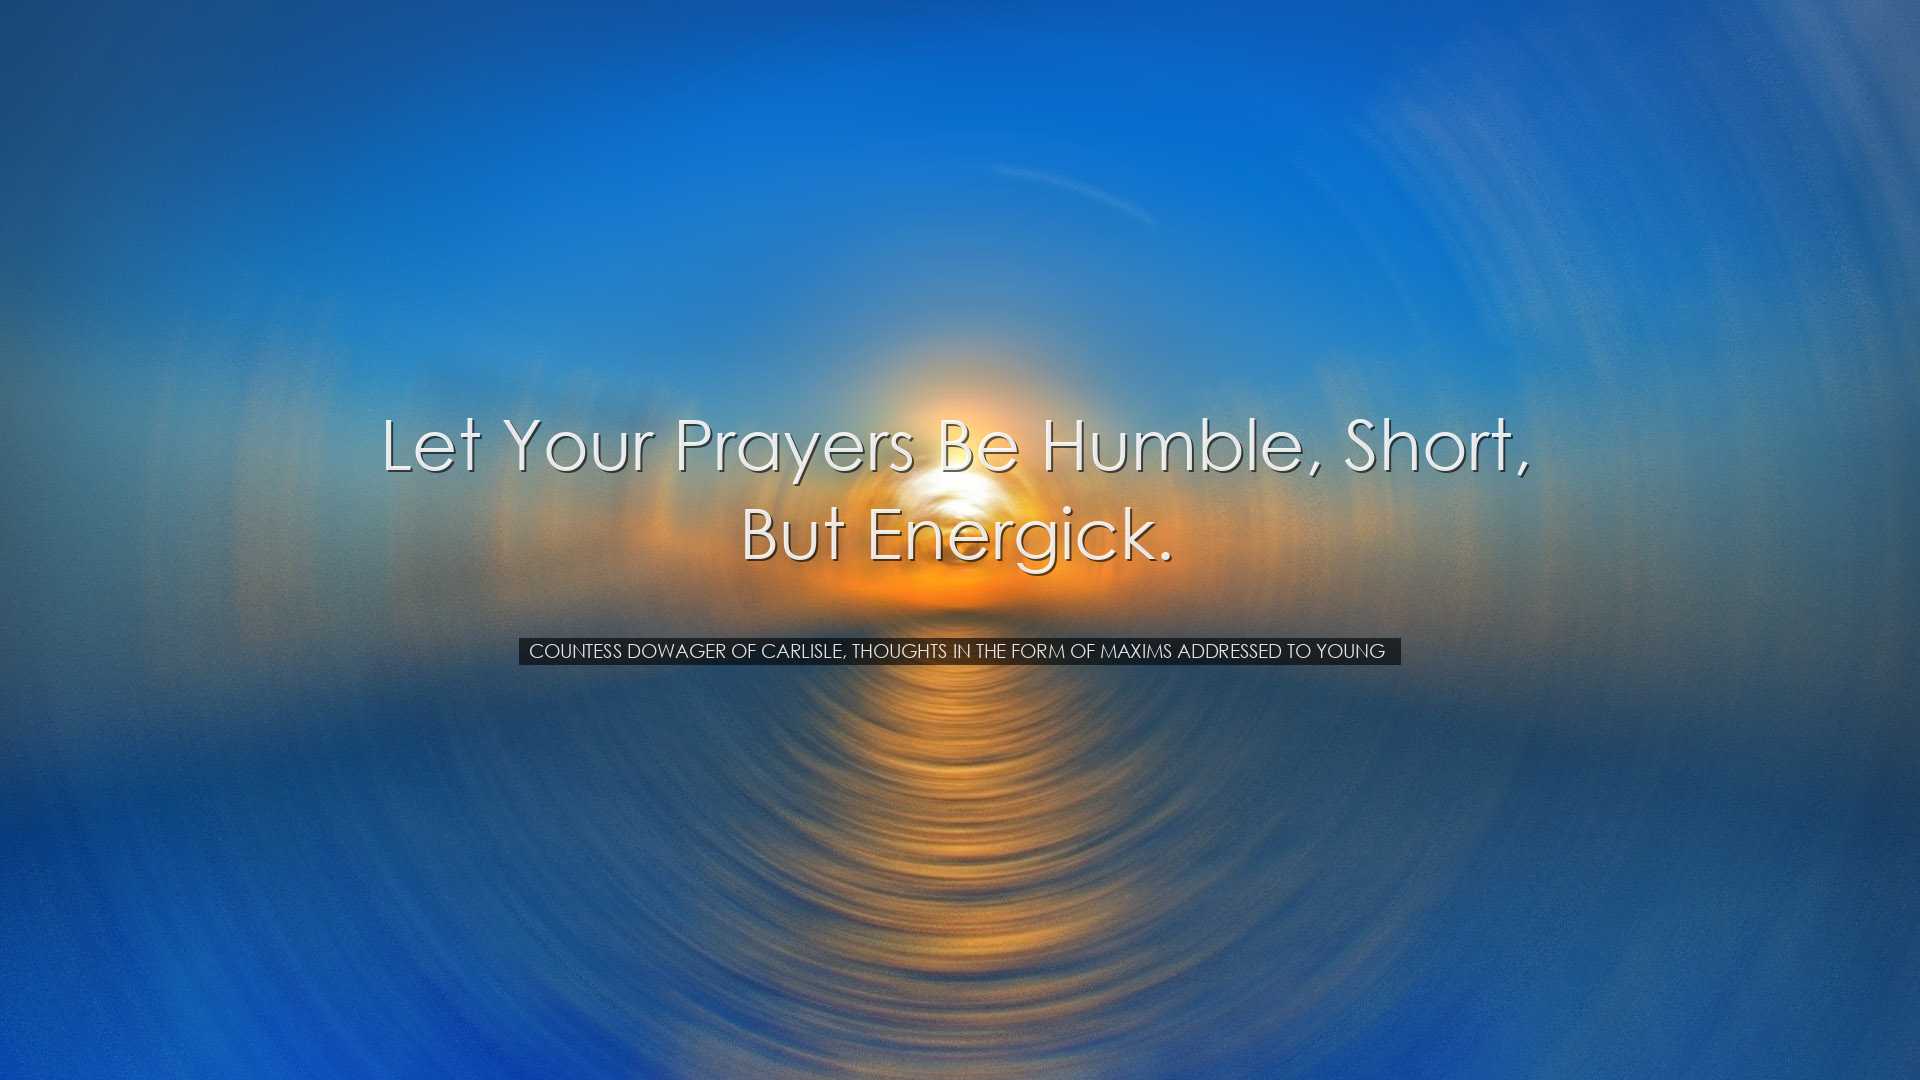 Let your prayers be humble, short, but energick. - Countess Dowage